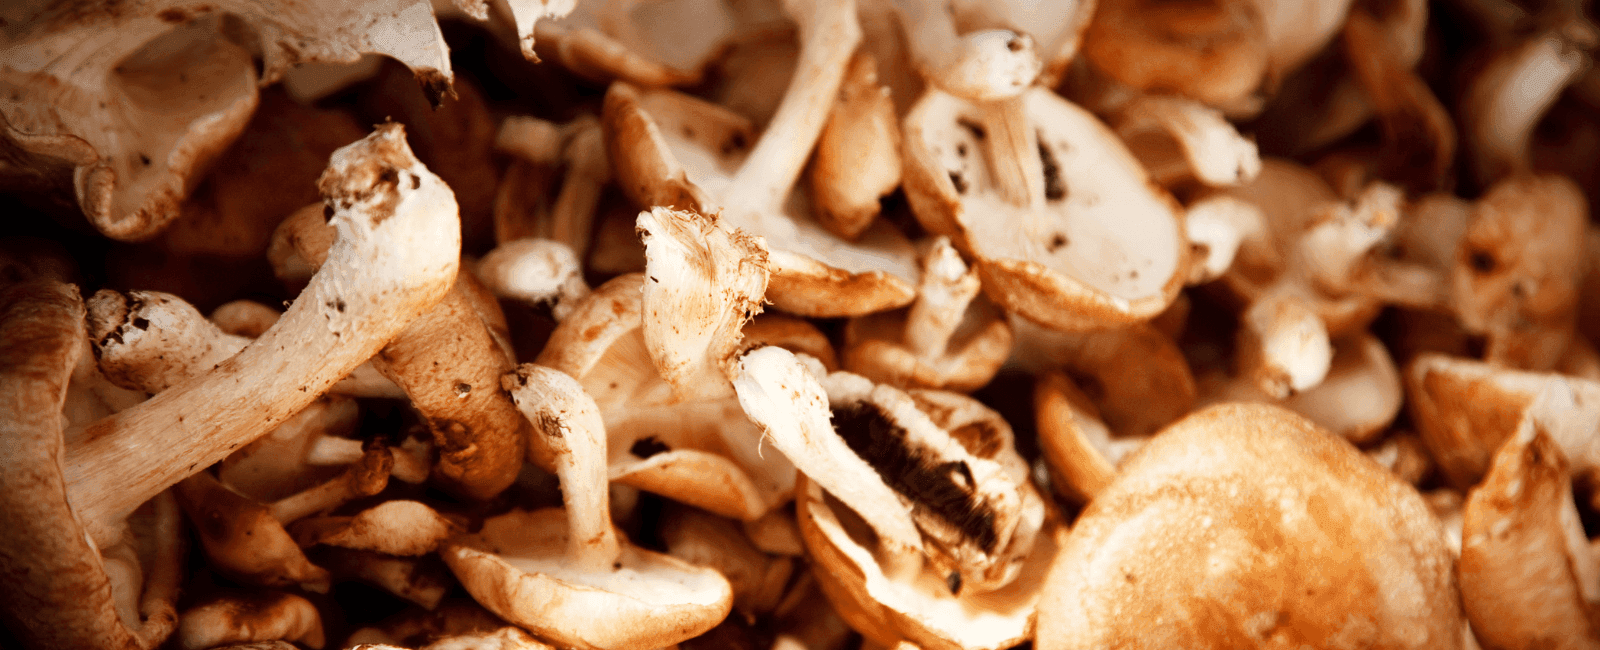 Shiitake Mushrooms Can Reduce Effects of Aging, According to New Study